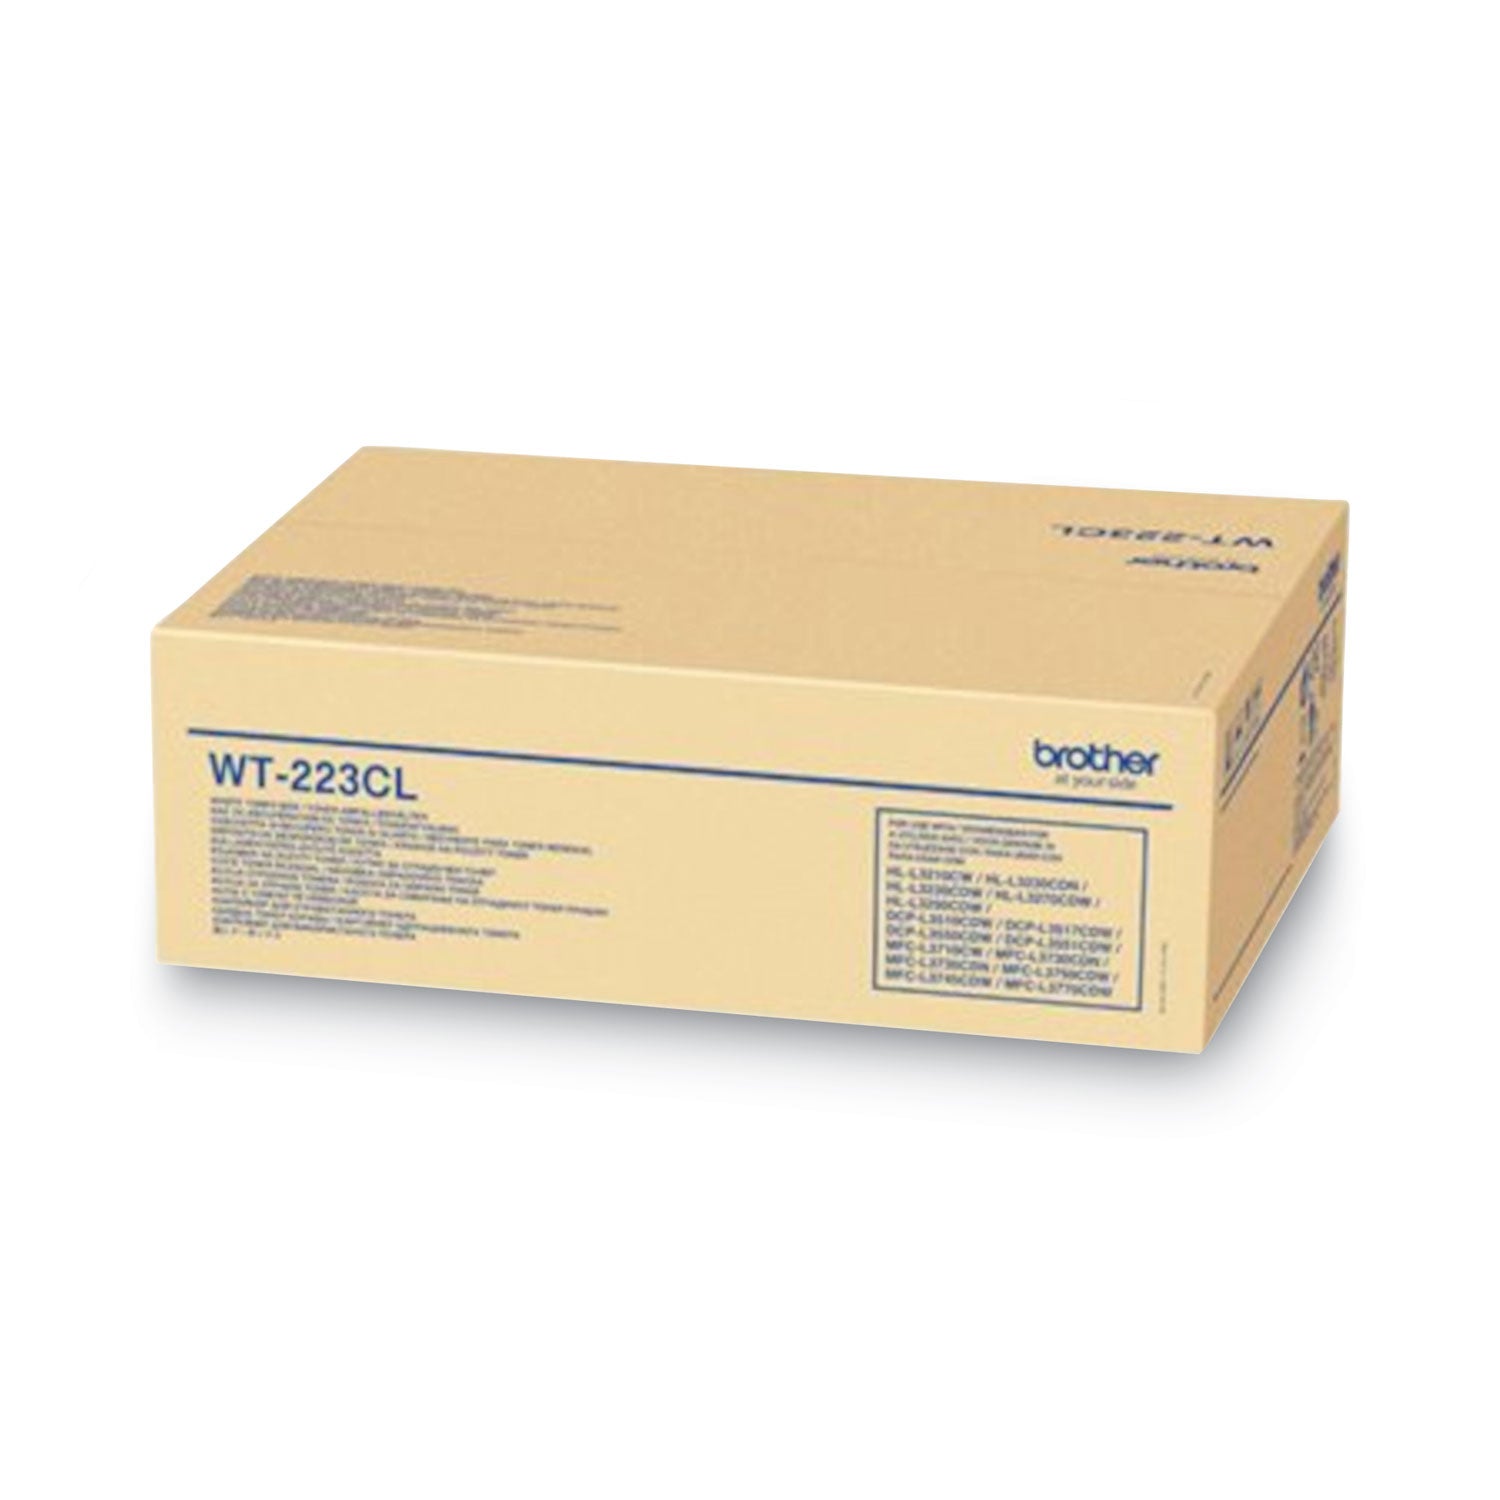 wt223cl-waste-toner-box-50000-page-yield_brtwt223cl - 1